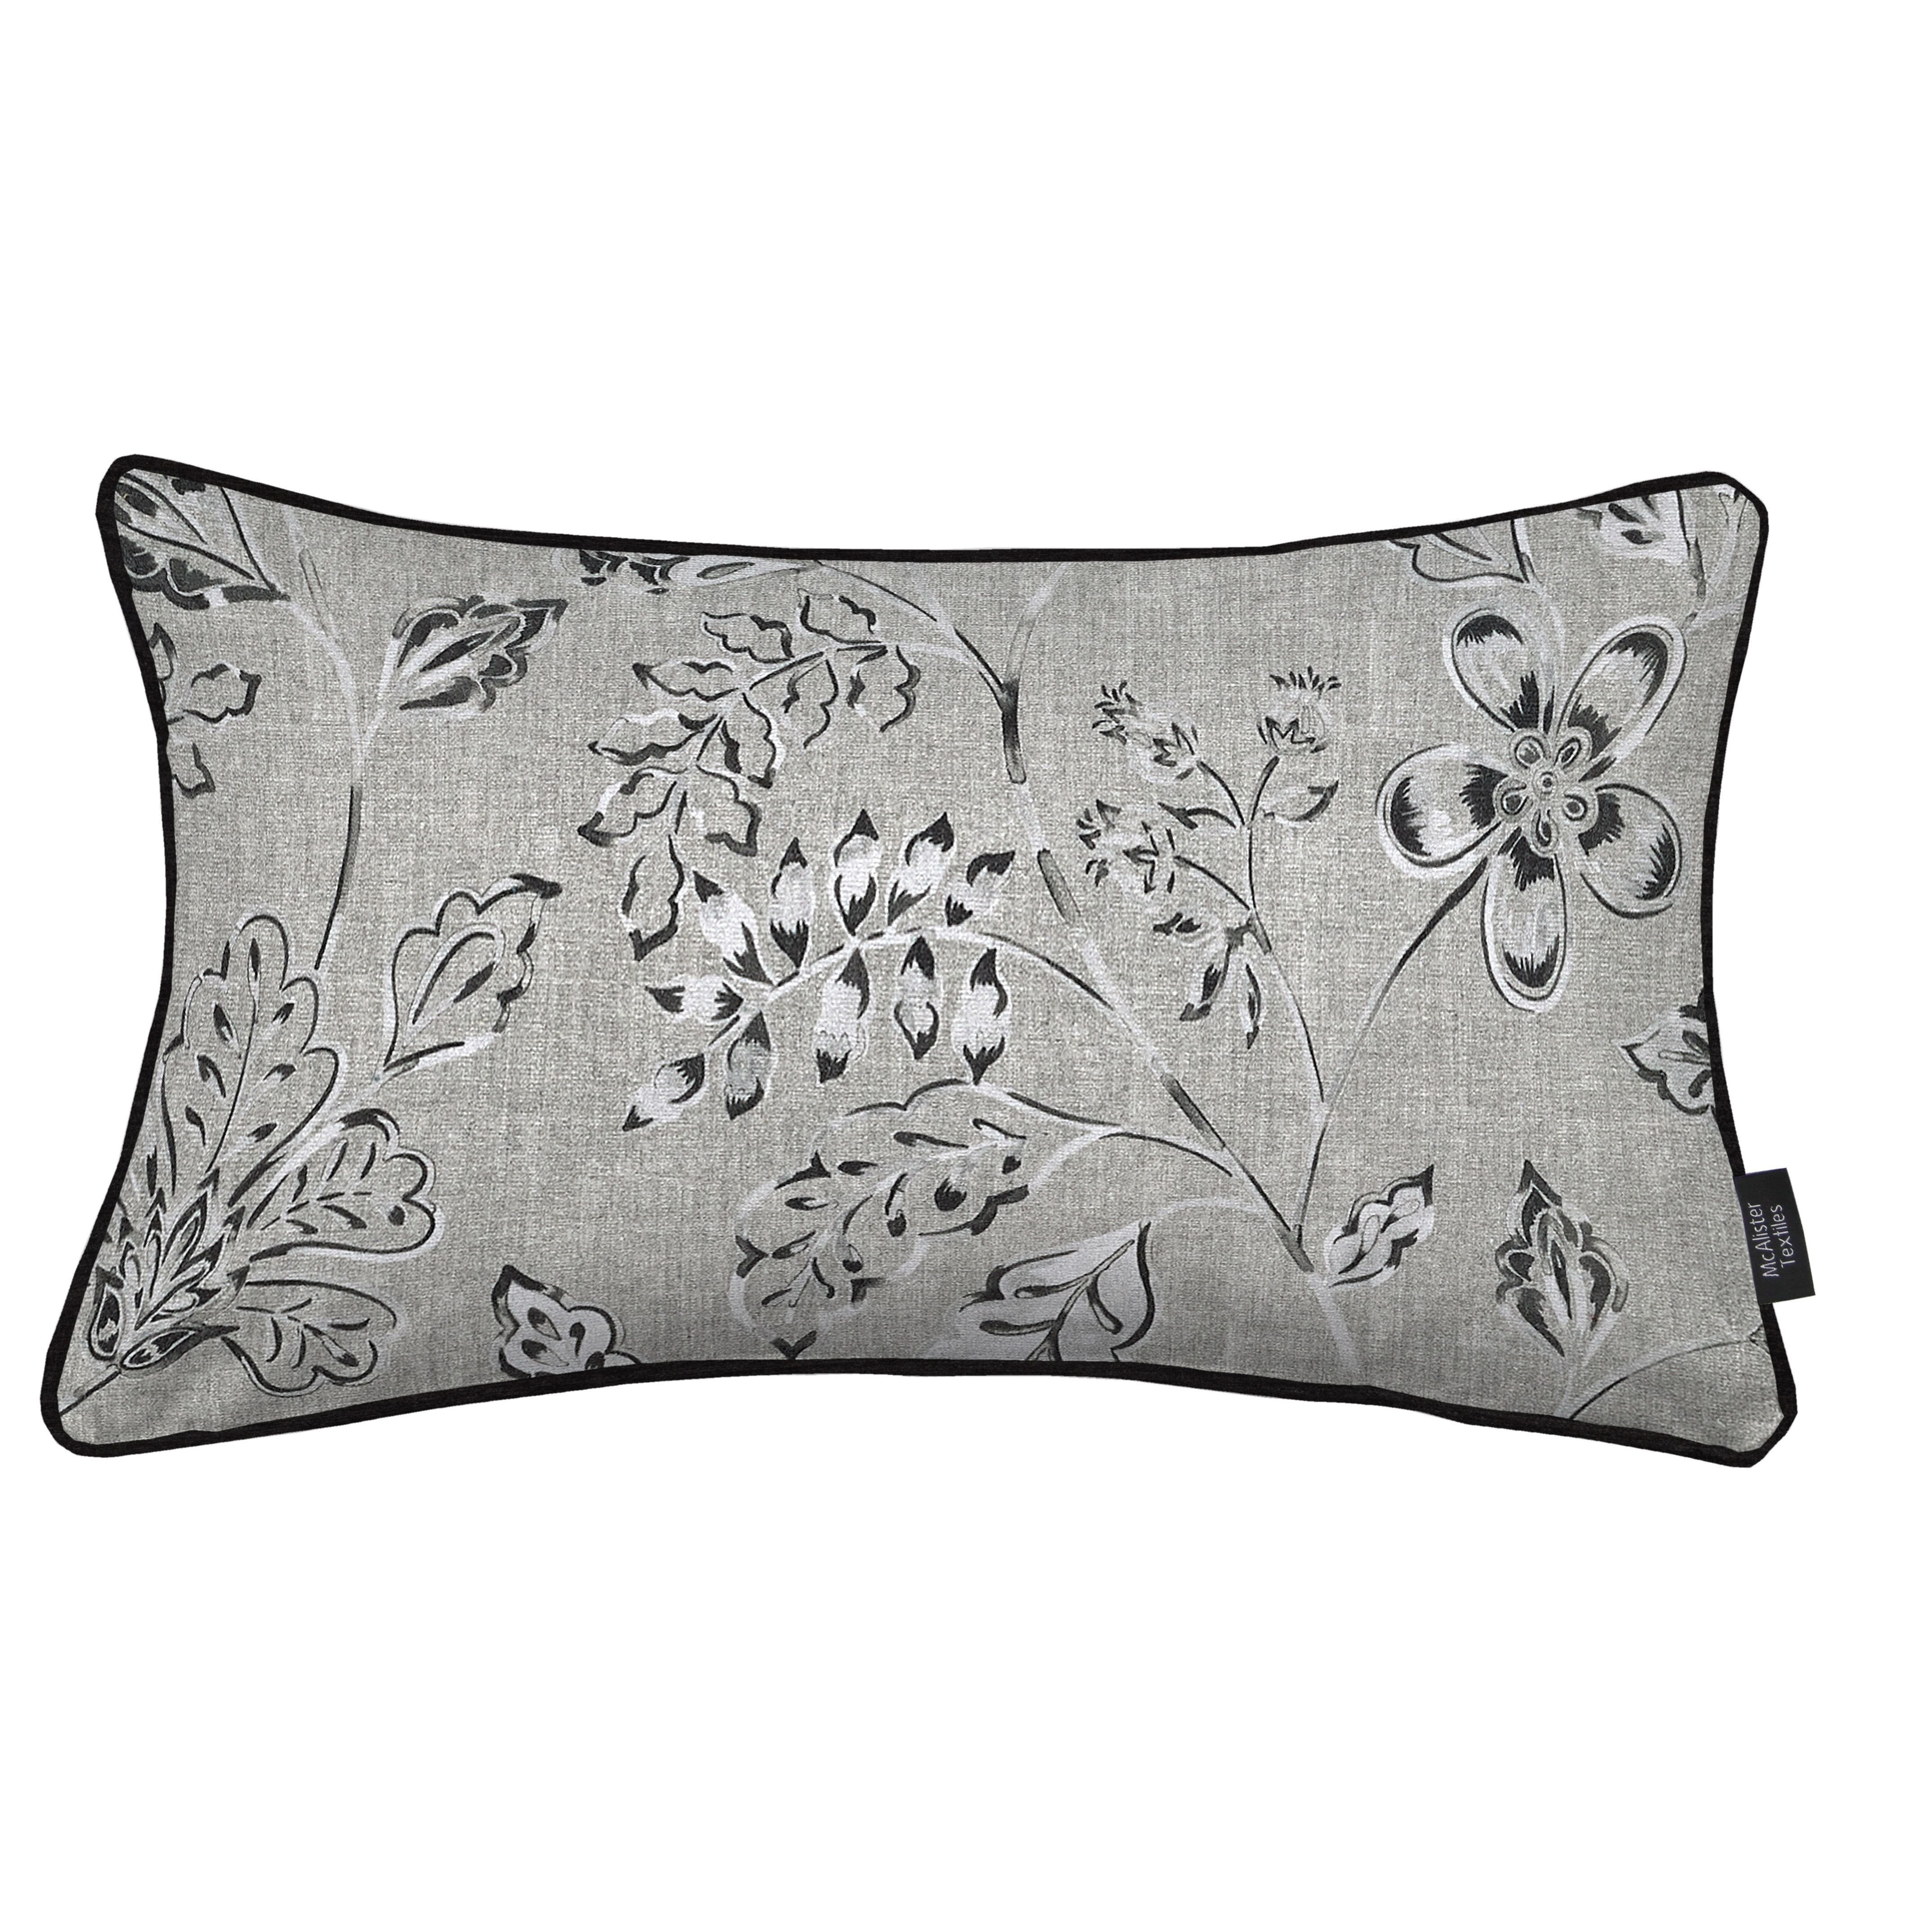 Eden Charcoal Grey Printed Pillows, Cover Only / 50cm x 30cm